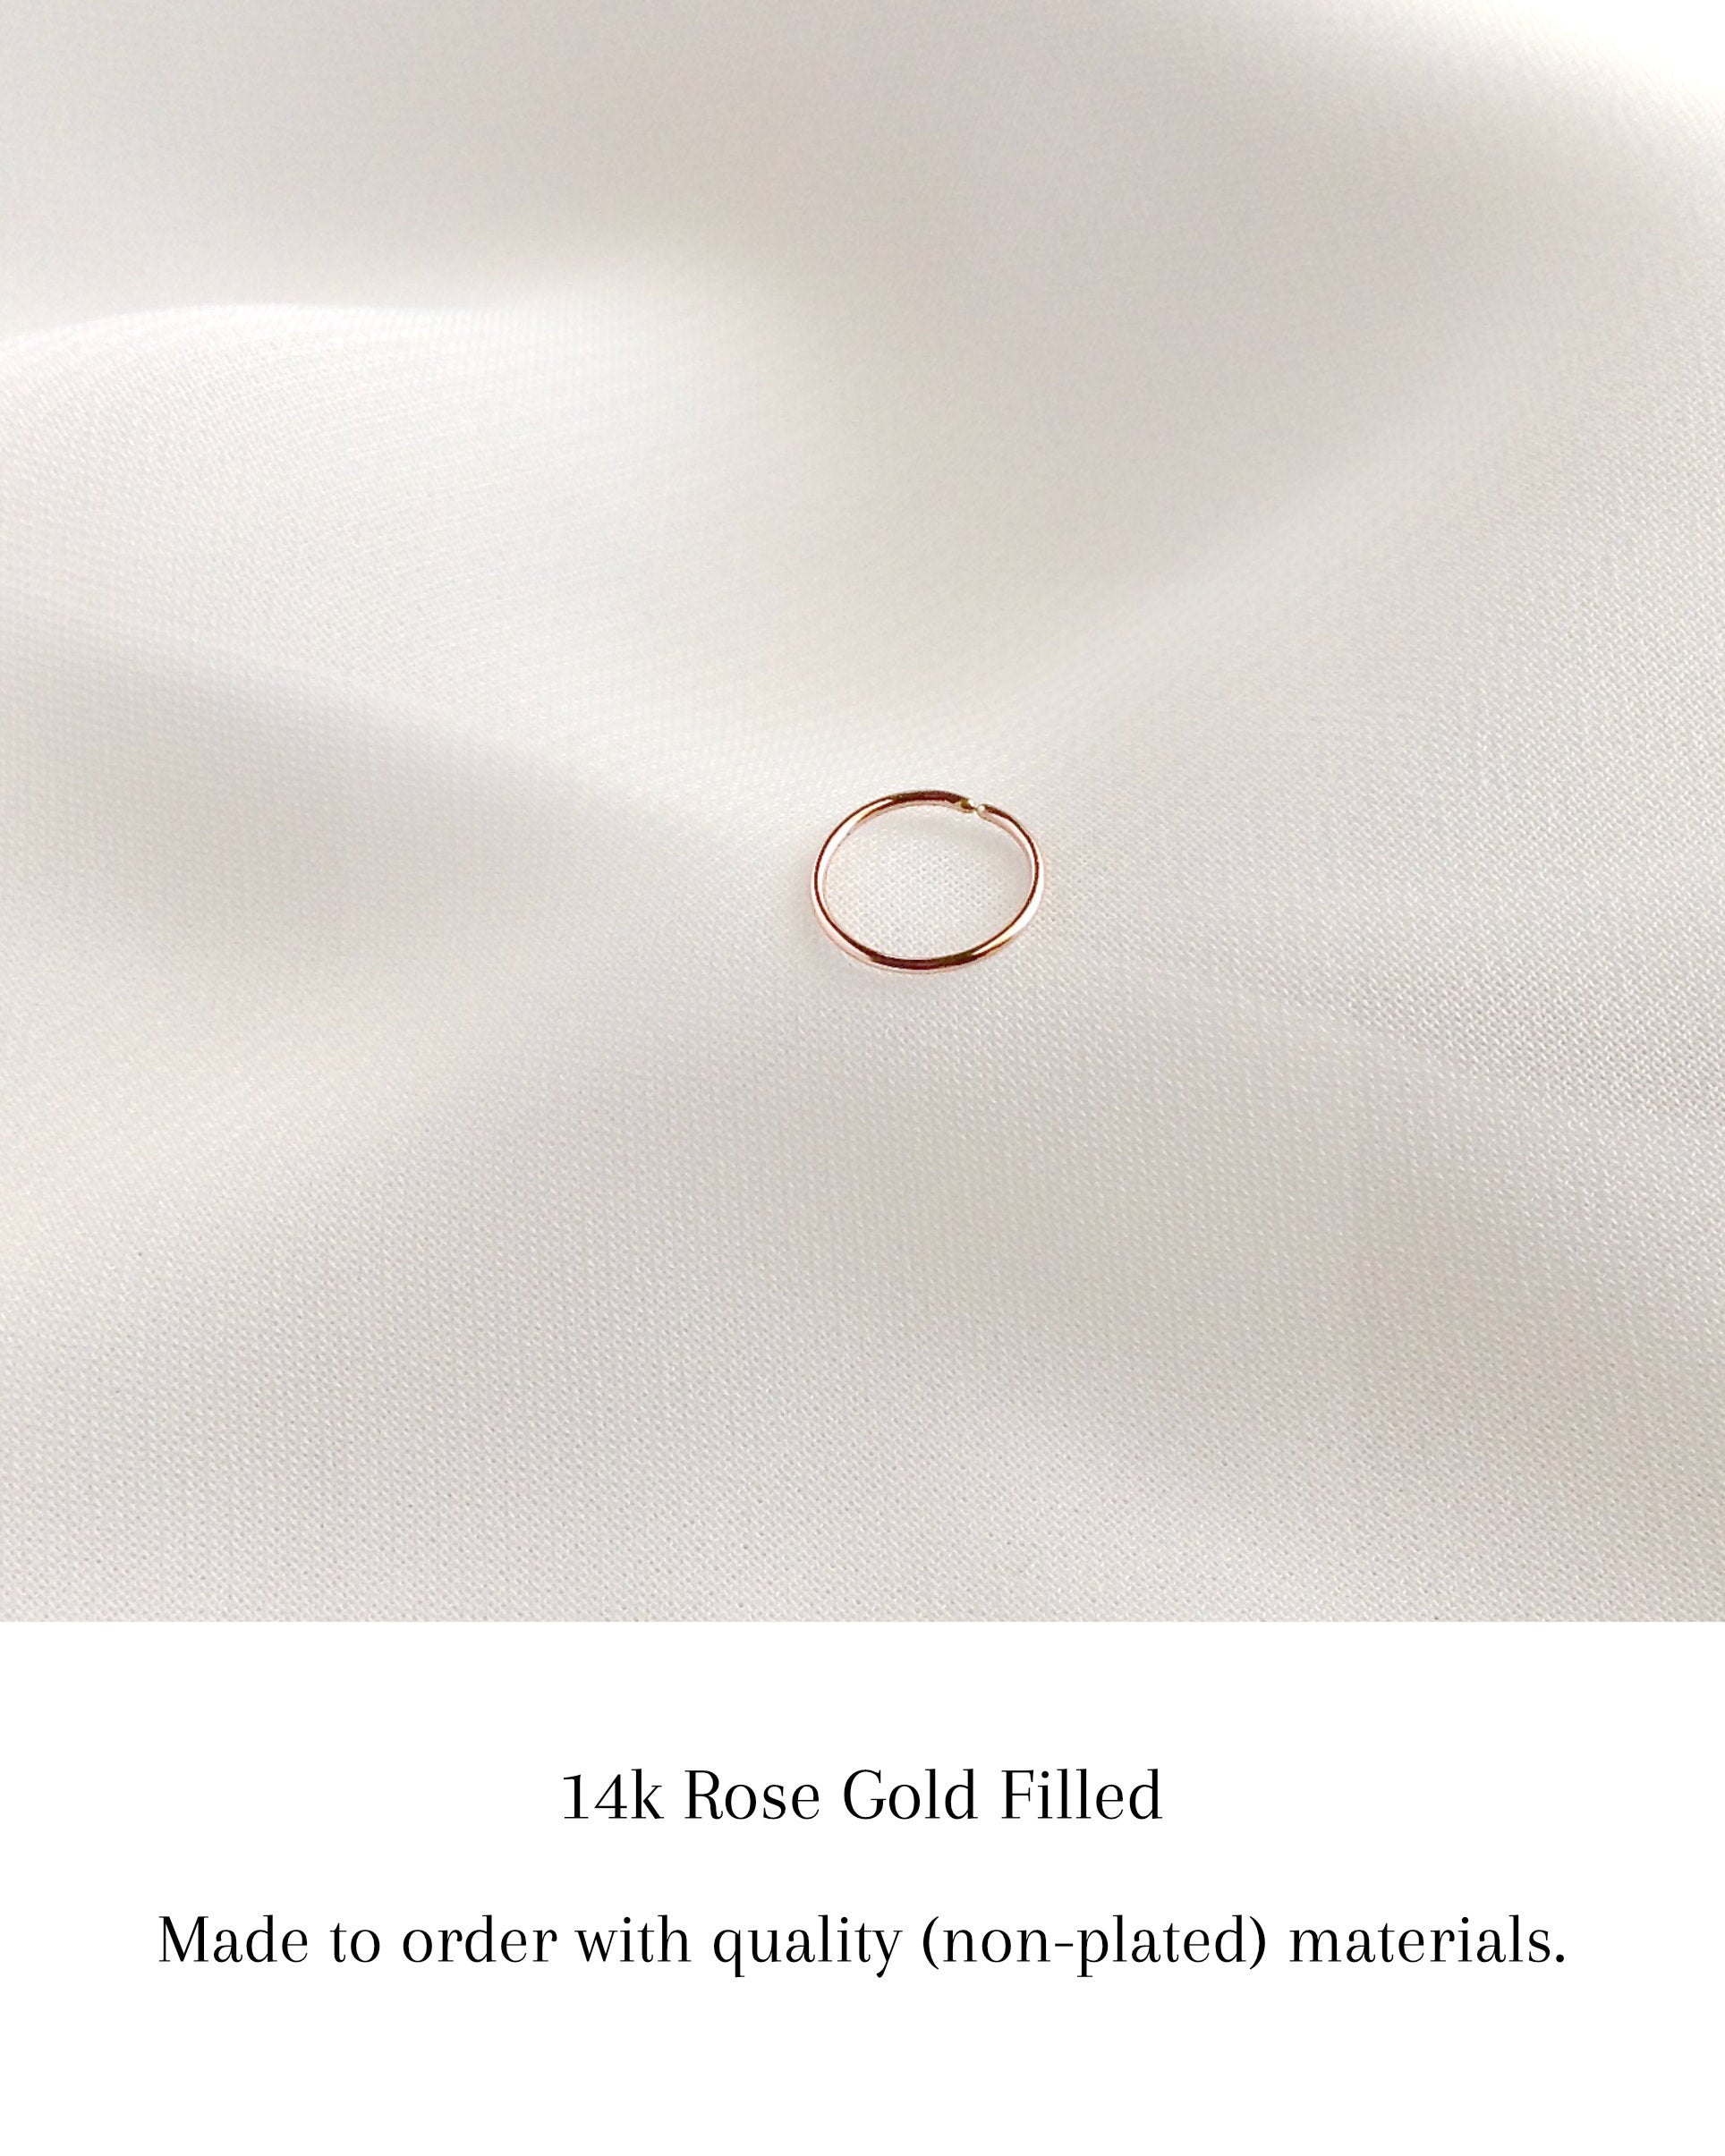 Rose Gold Filled Cartilage Hoop Quality Materials | IB Jewelry